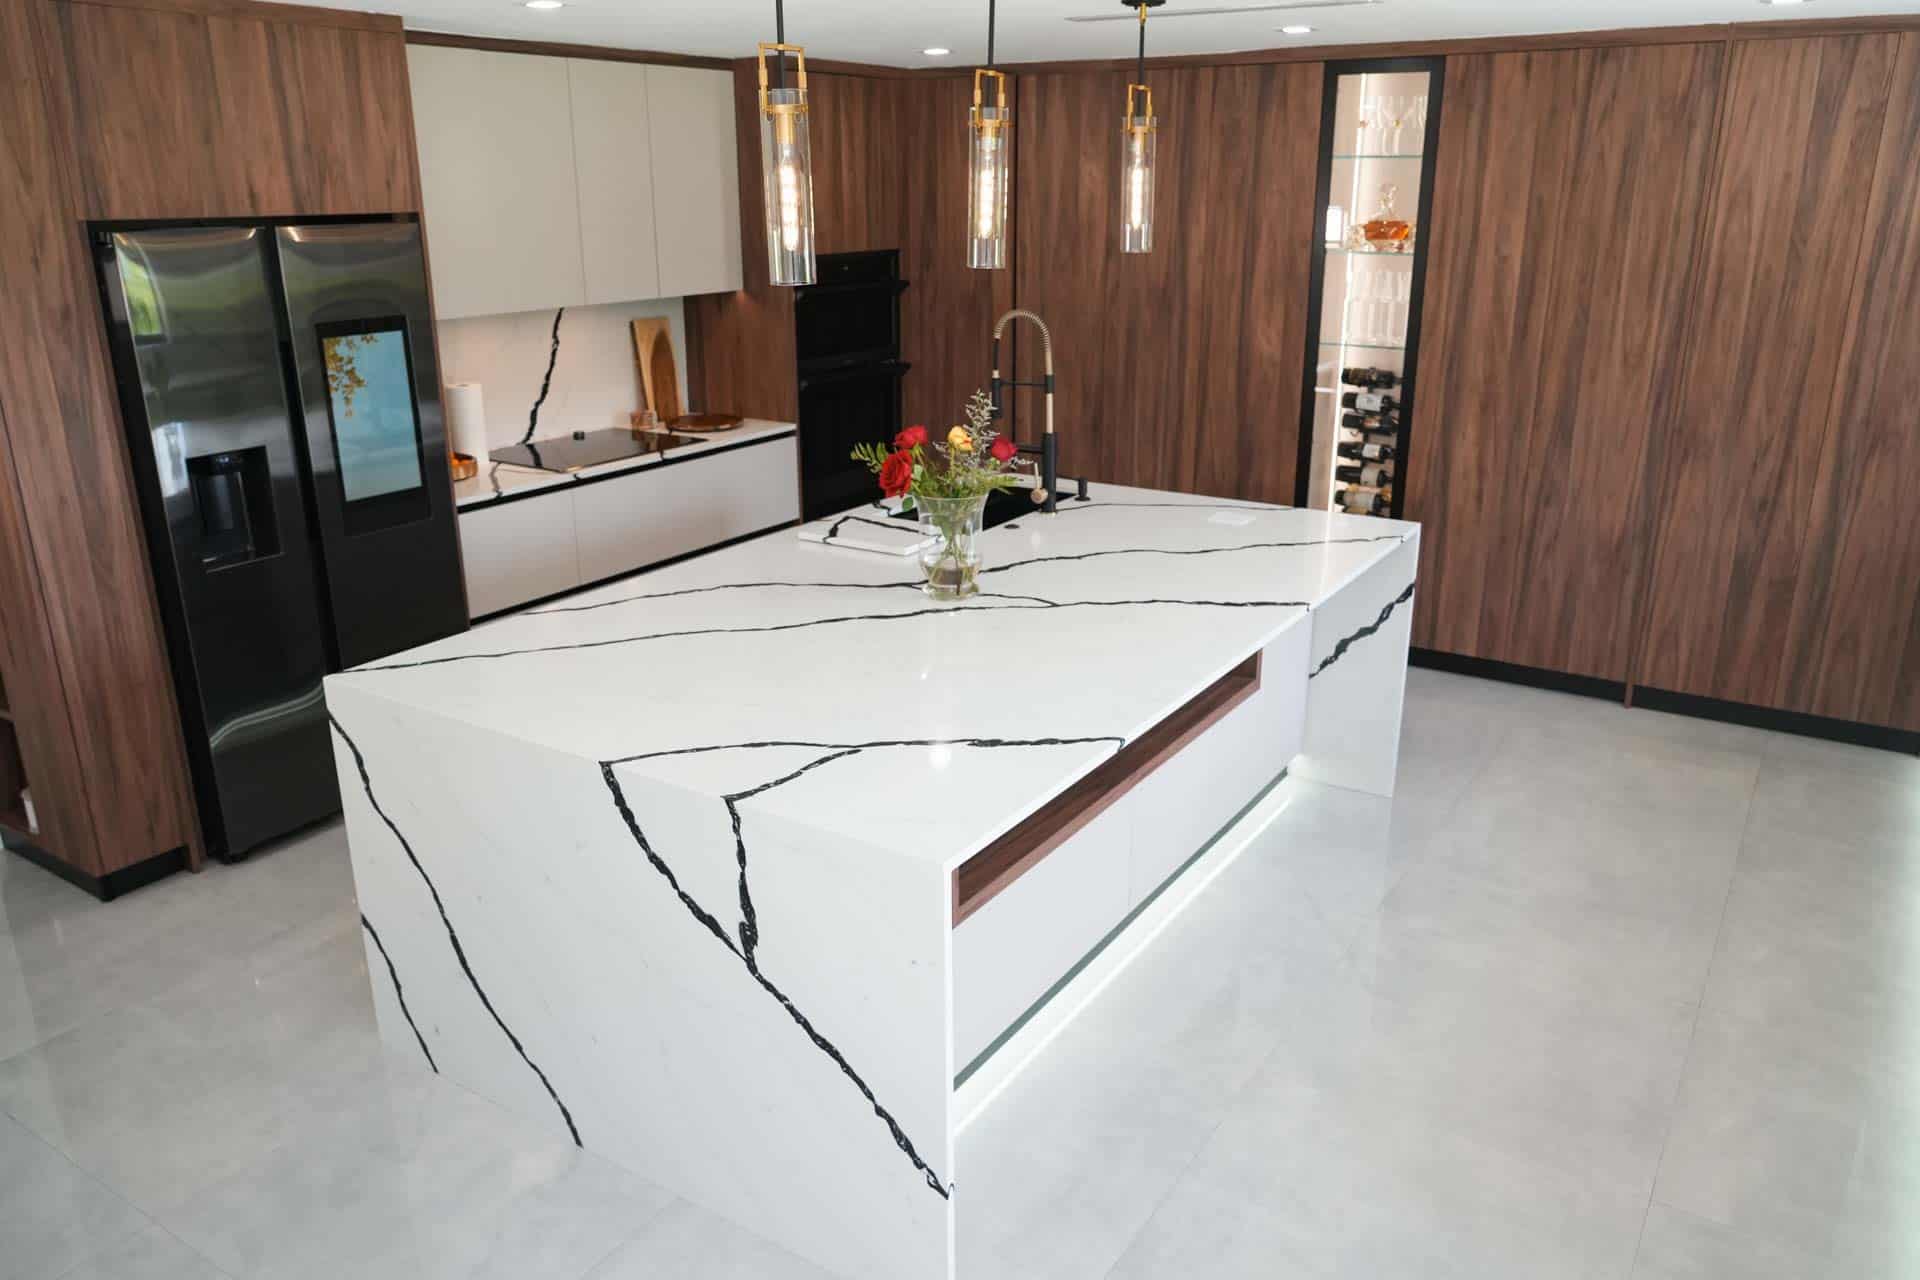 Modernize Your Kitchen with Style